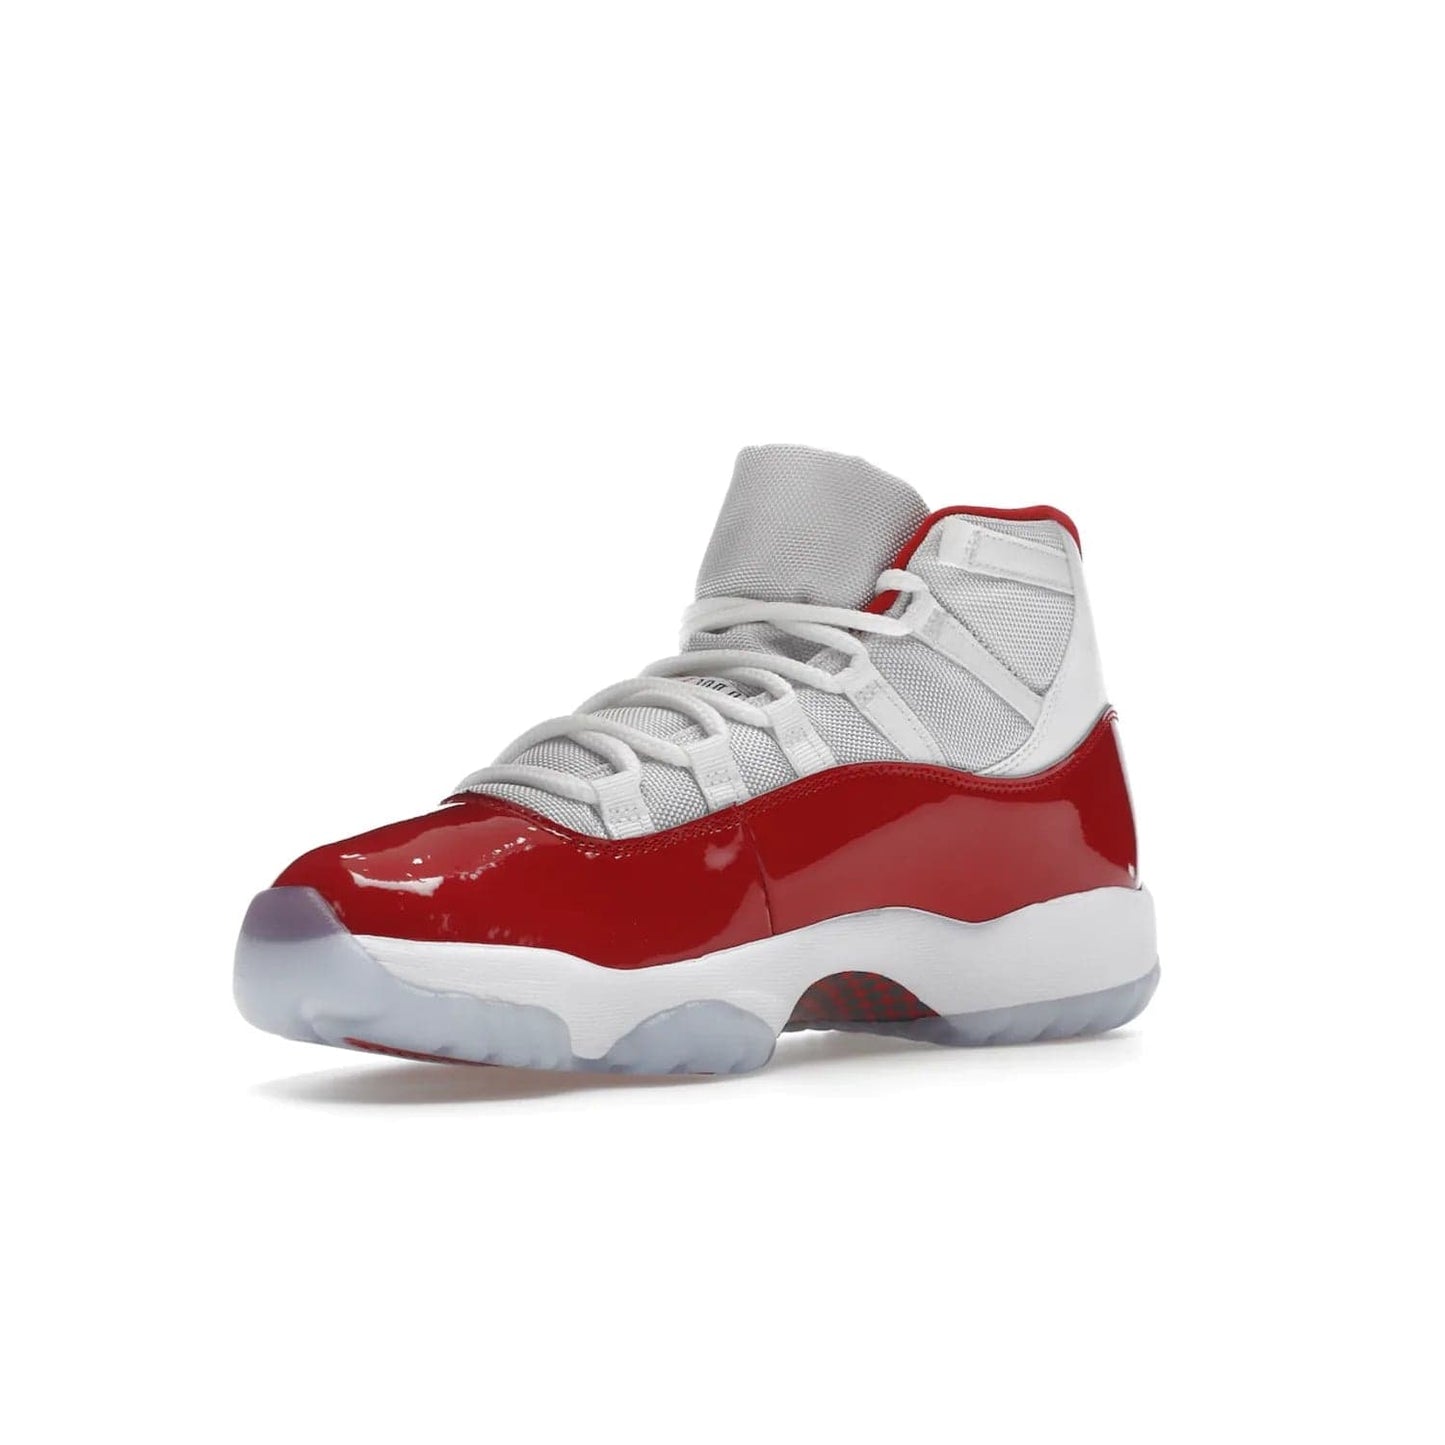 Jordan 11 Retro Cherry (2022) - Image 15 - Only at www.BallersClubKickz.com - The Air Jordan 11 Cherry features classic patent leather with Cherry red accents, icy blue outsole, and debossed 23 on the heel tab. Refresh your sneaker game with this iconic update, available December 10, 2022.